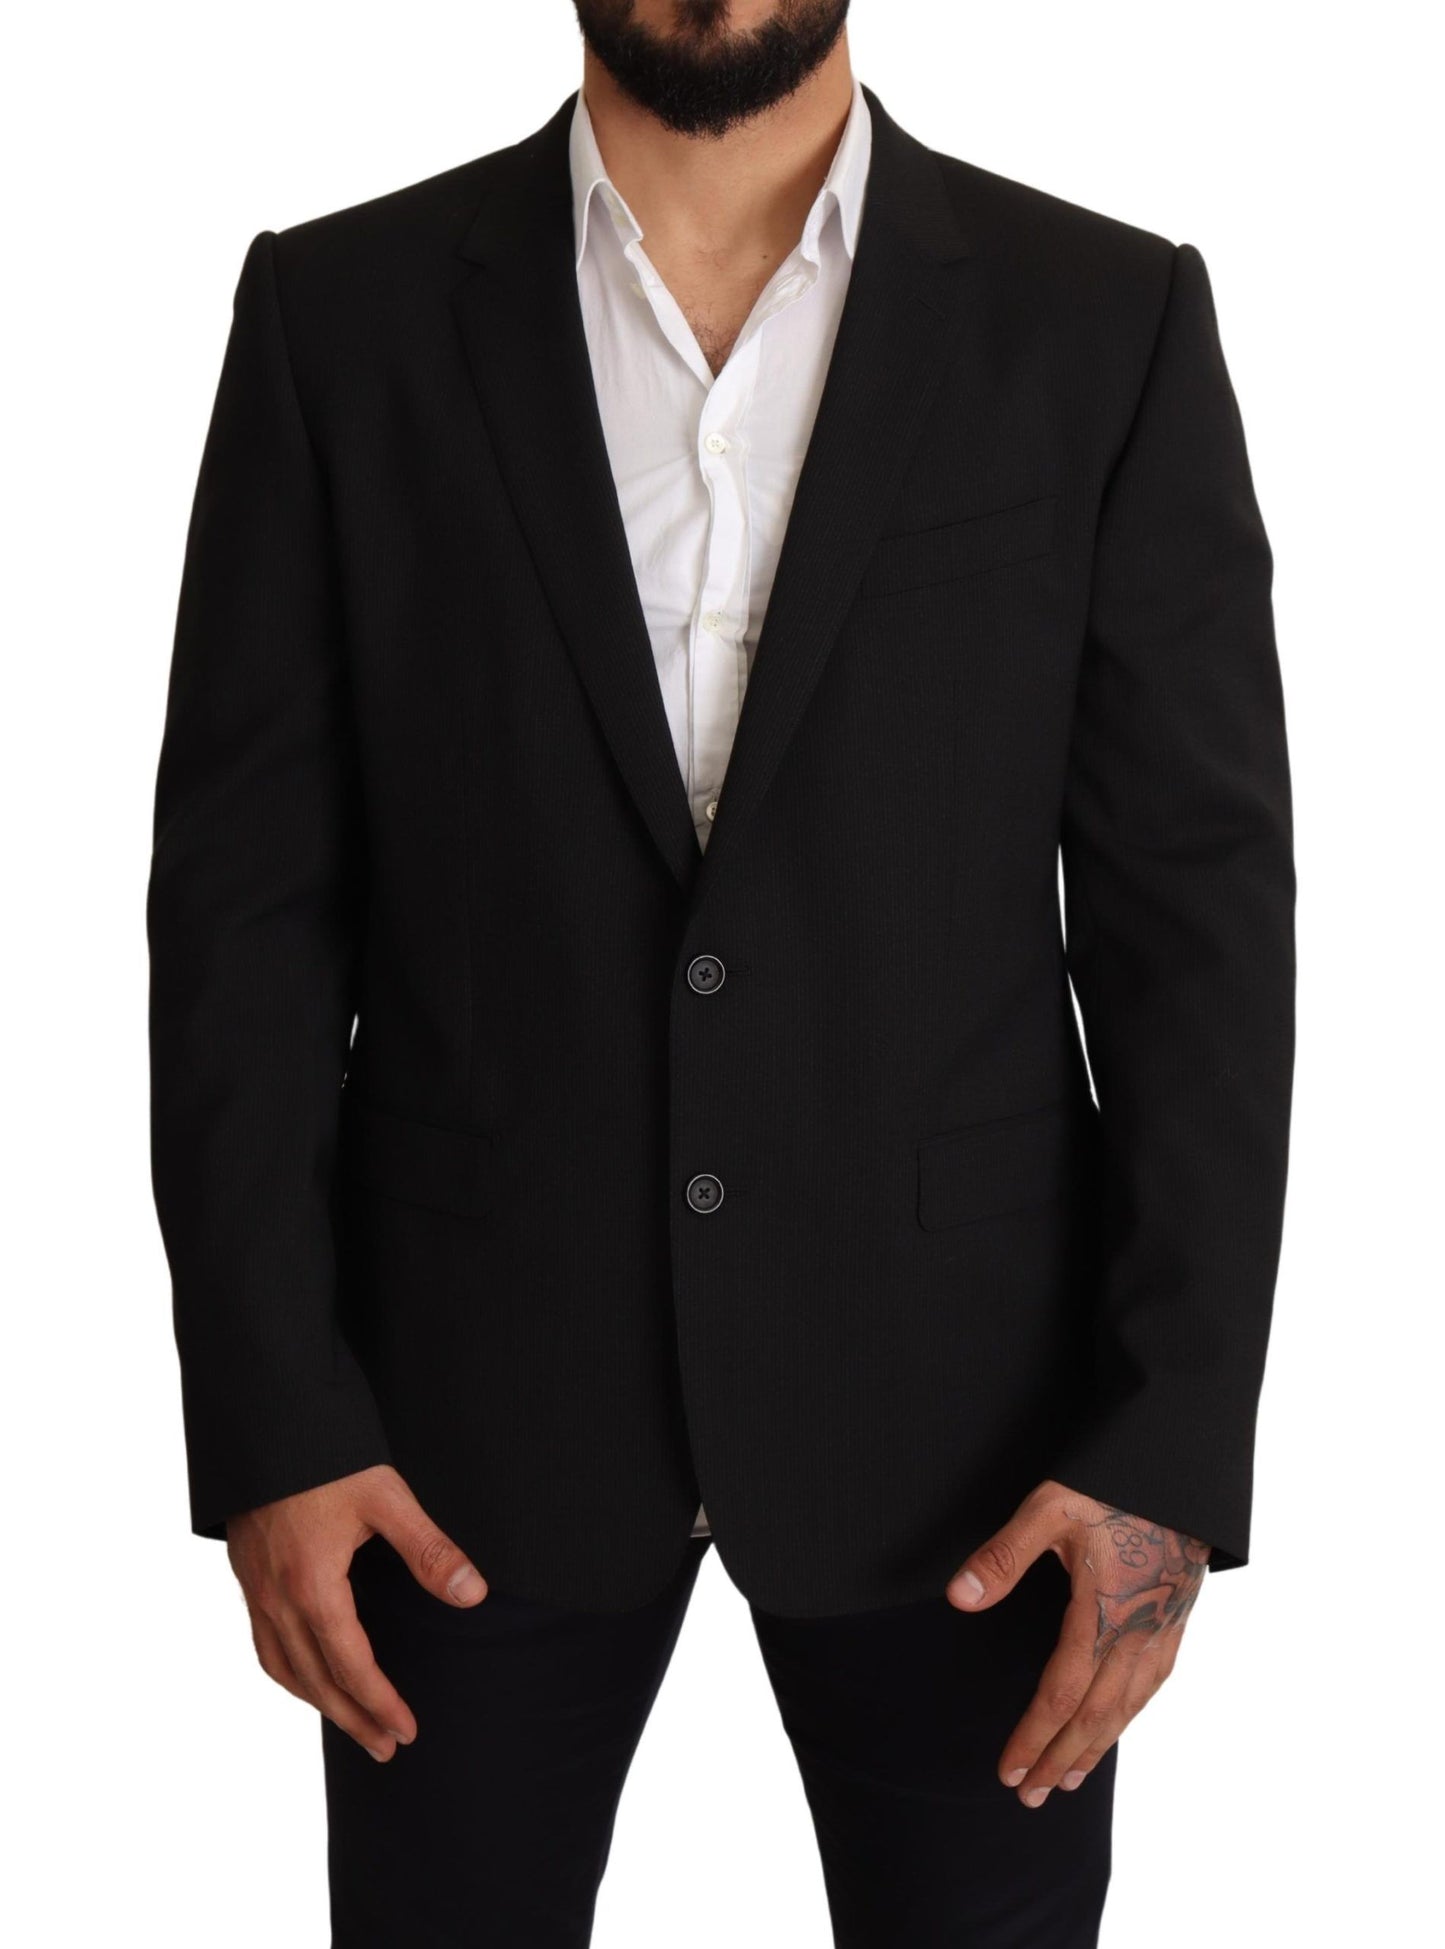 Black Striped MARTINI Jacket Blazer - Designed by Dolce & Gabbana Available to Buy at a Discounted Price on Moon Behind The Hill Online Designer Discount Store